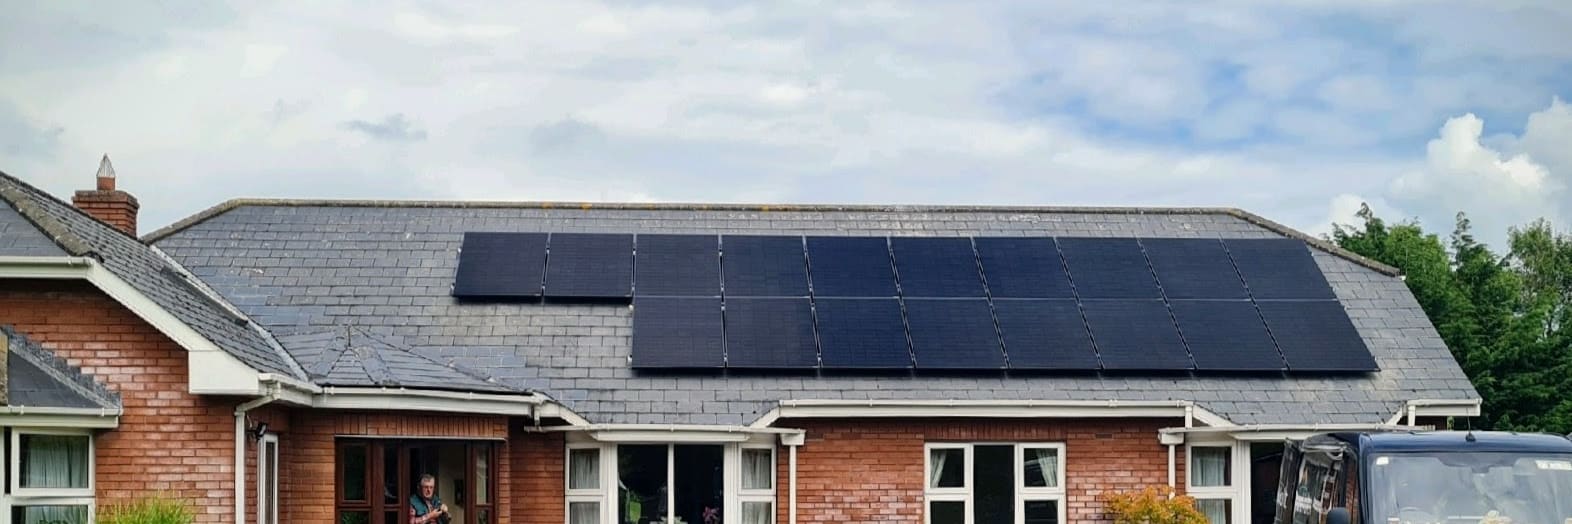 Solar panel installation of 18 panels on a south-facing roof in Dublin